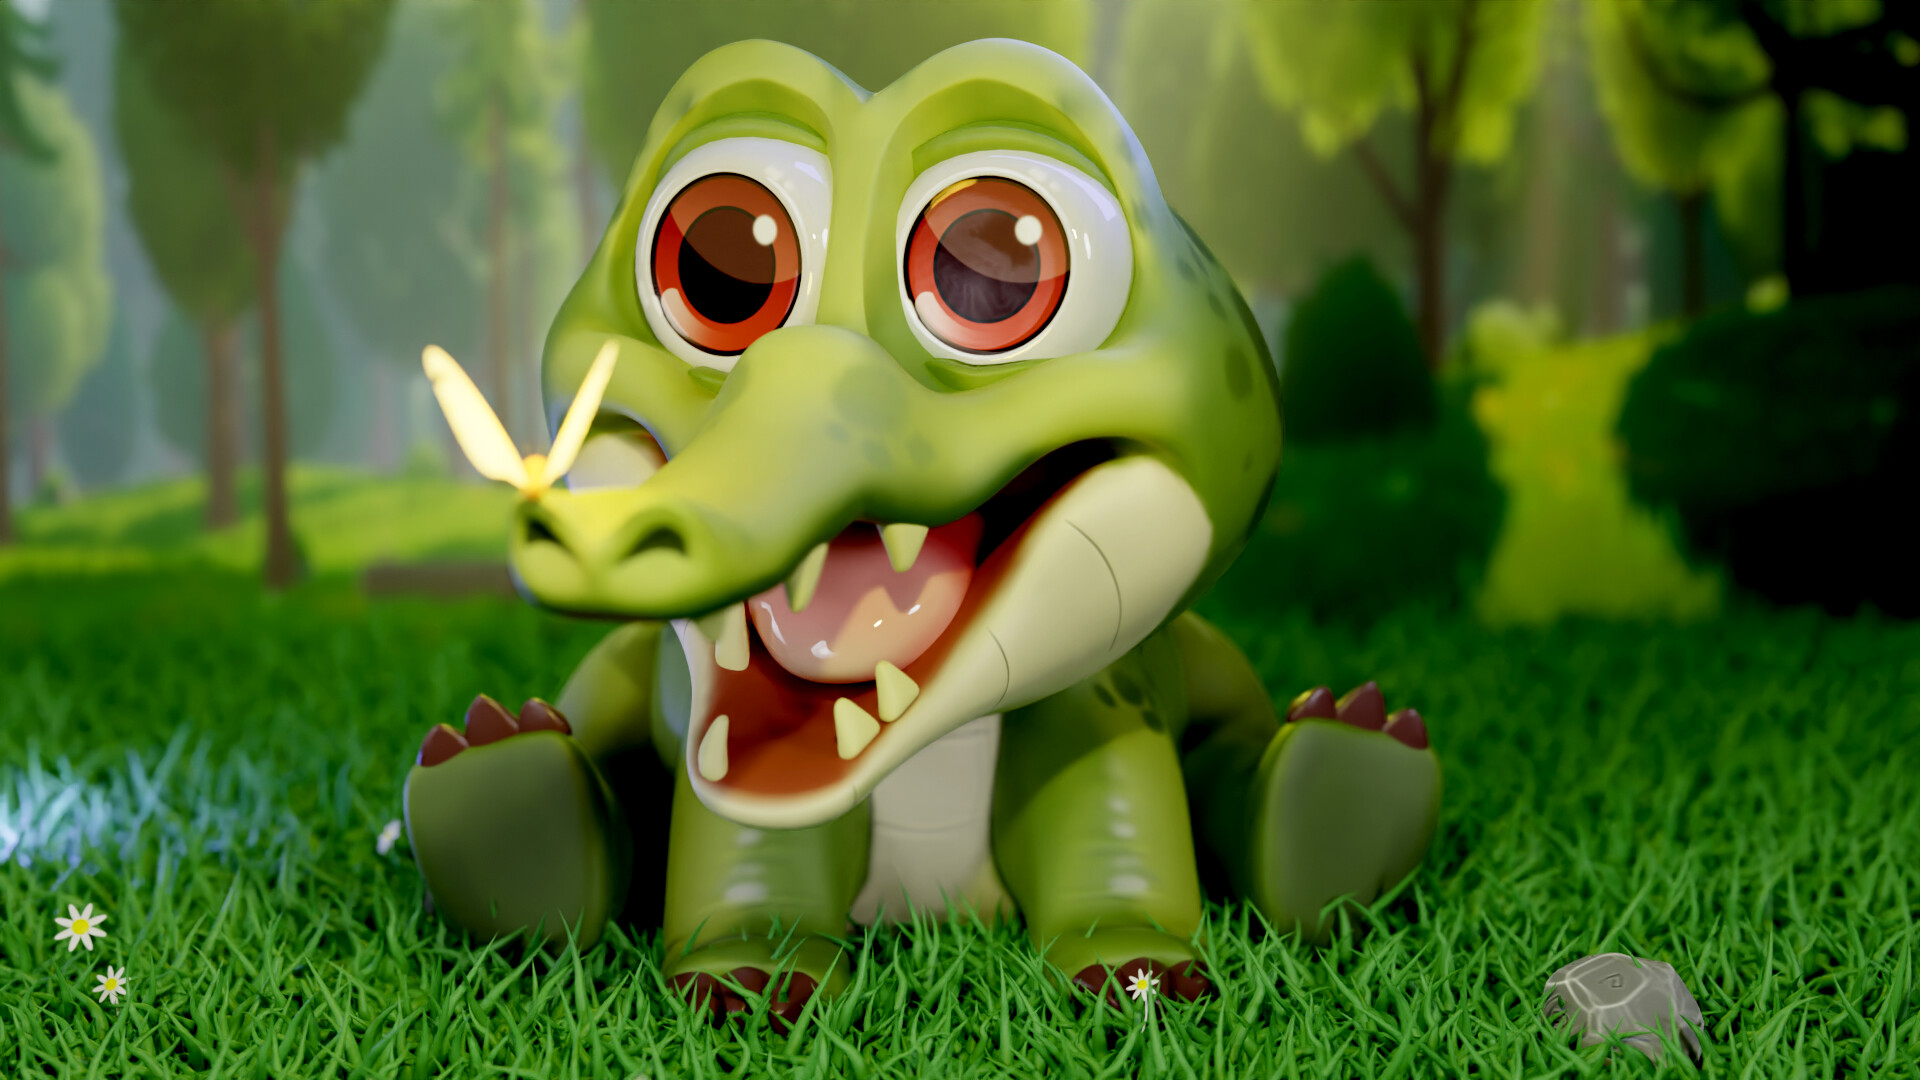 Little crocodile 3D - Finished Projects - Blender Artists Community